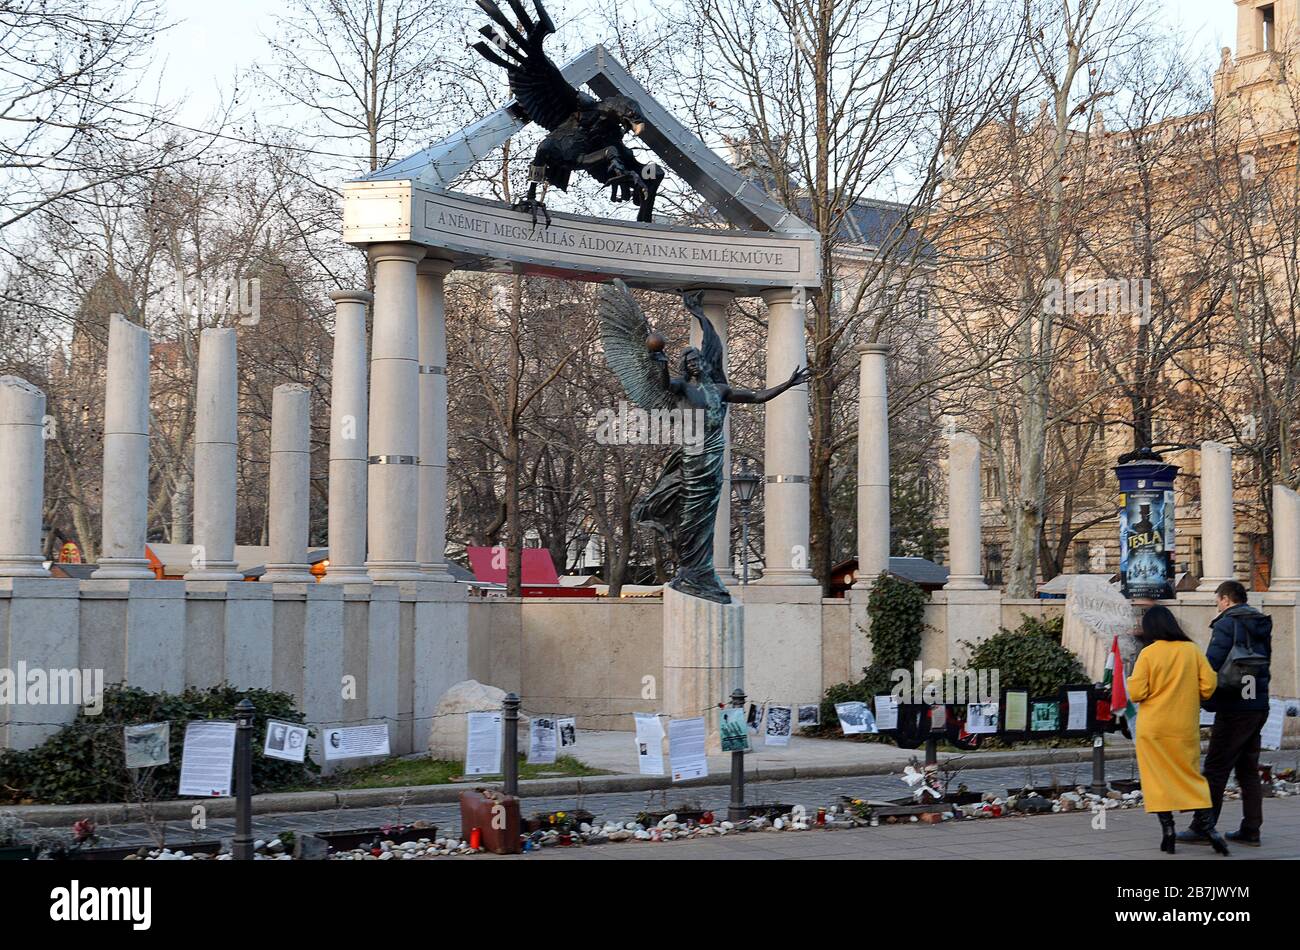 BUDAPEST, HUNGARY - 9 FEBRUARY 2020: The controversial  monument in Szabadsag Square to the victims of German occupatiion. Stock Photo